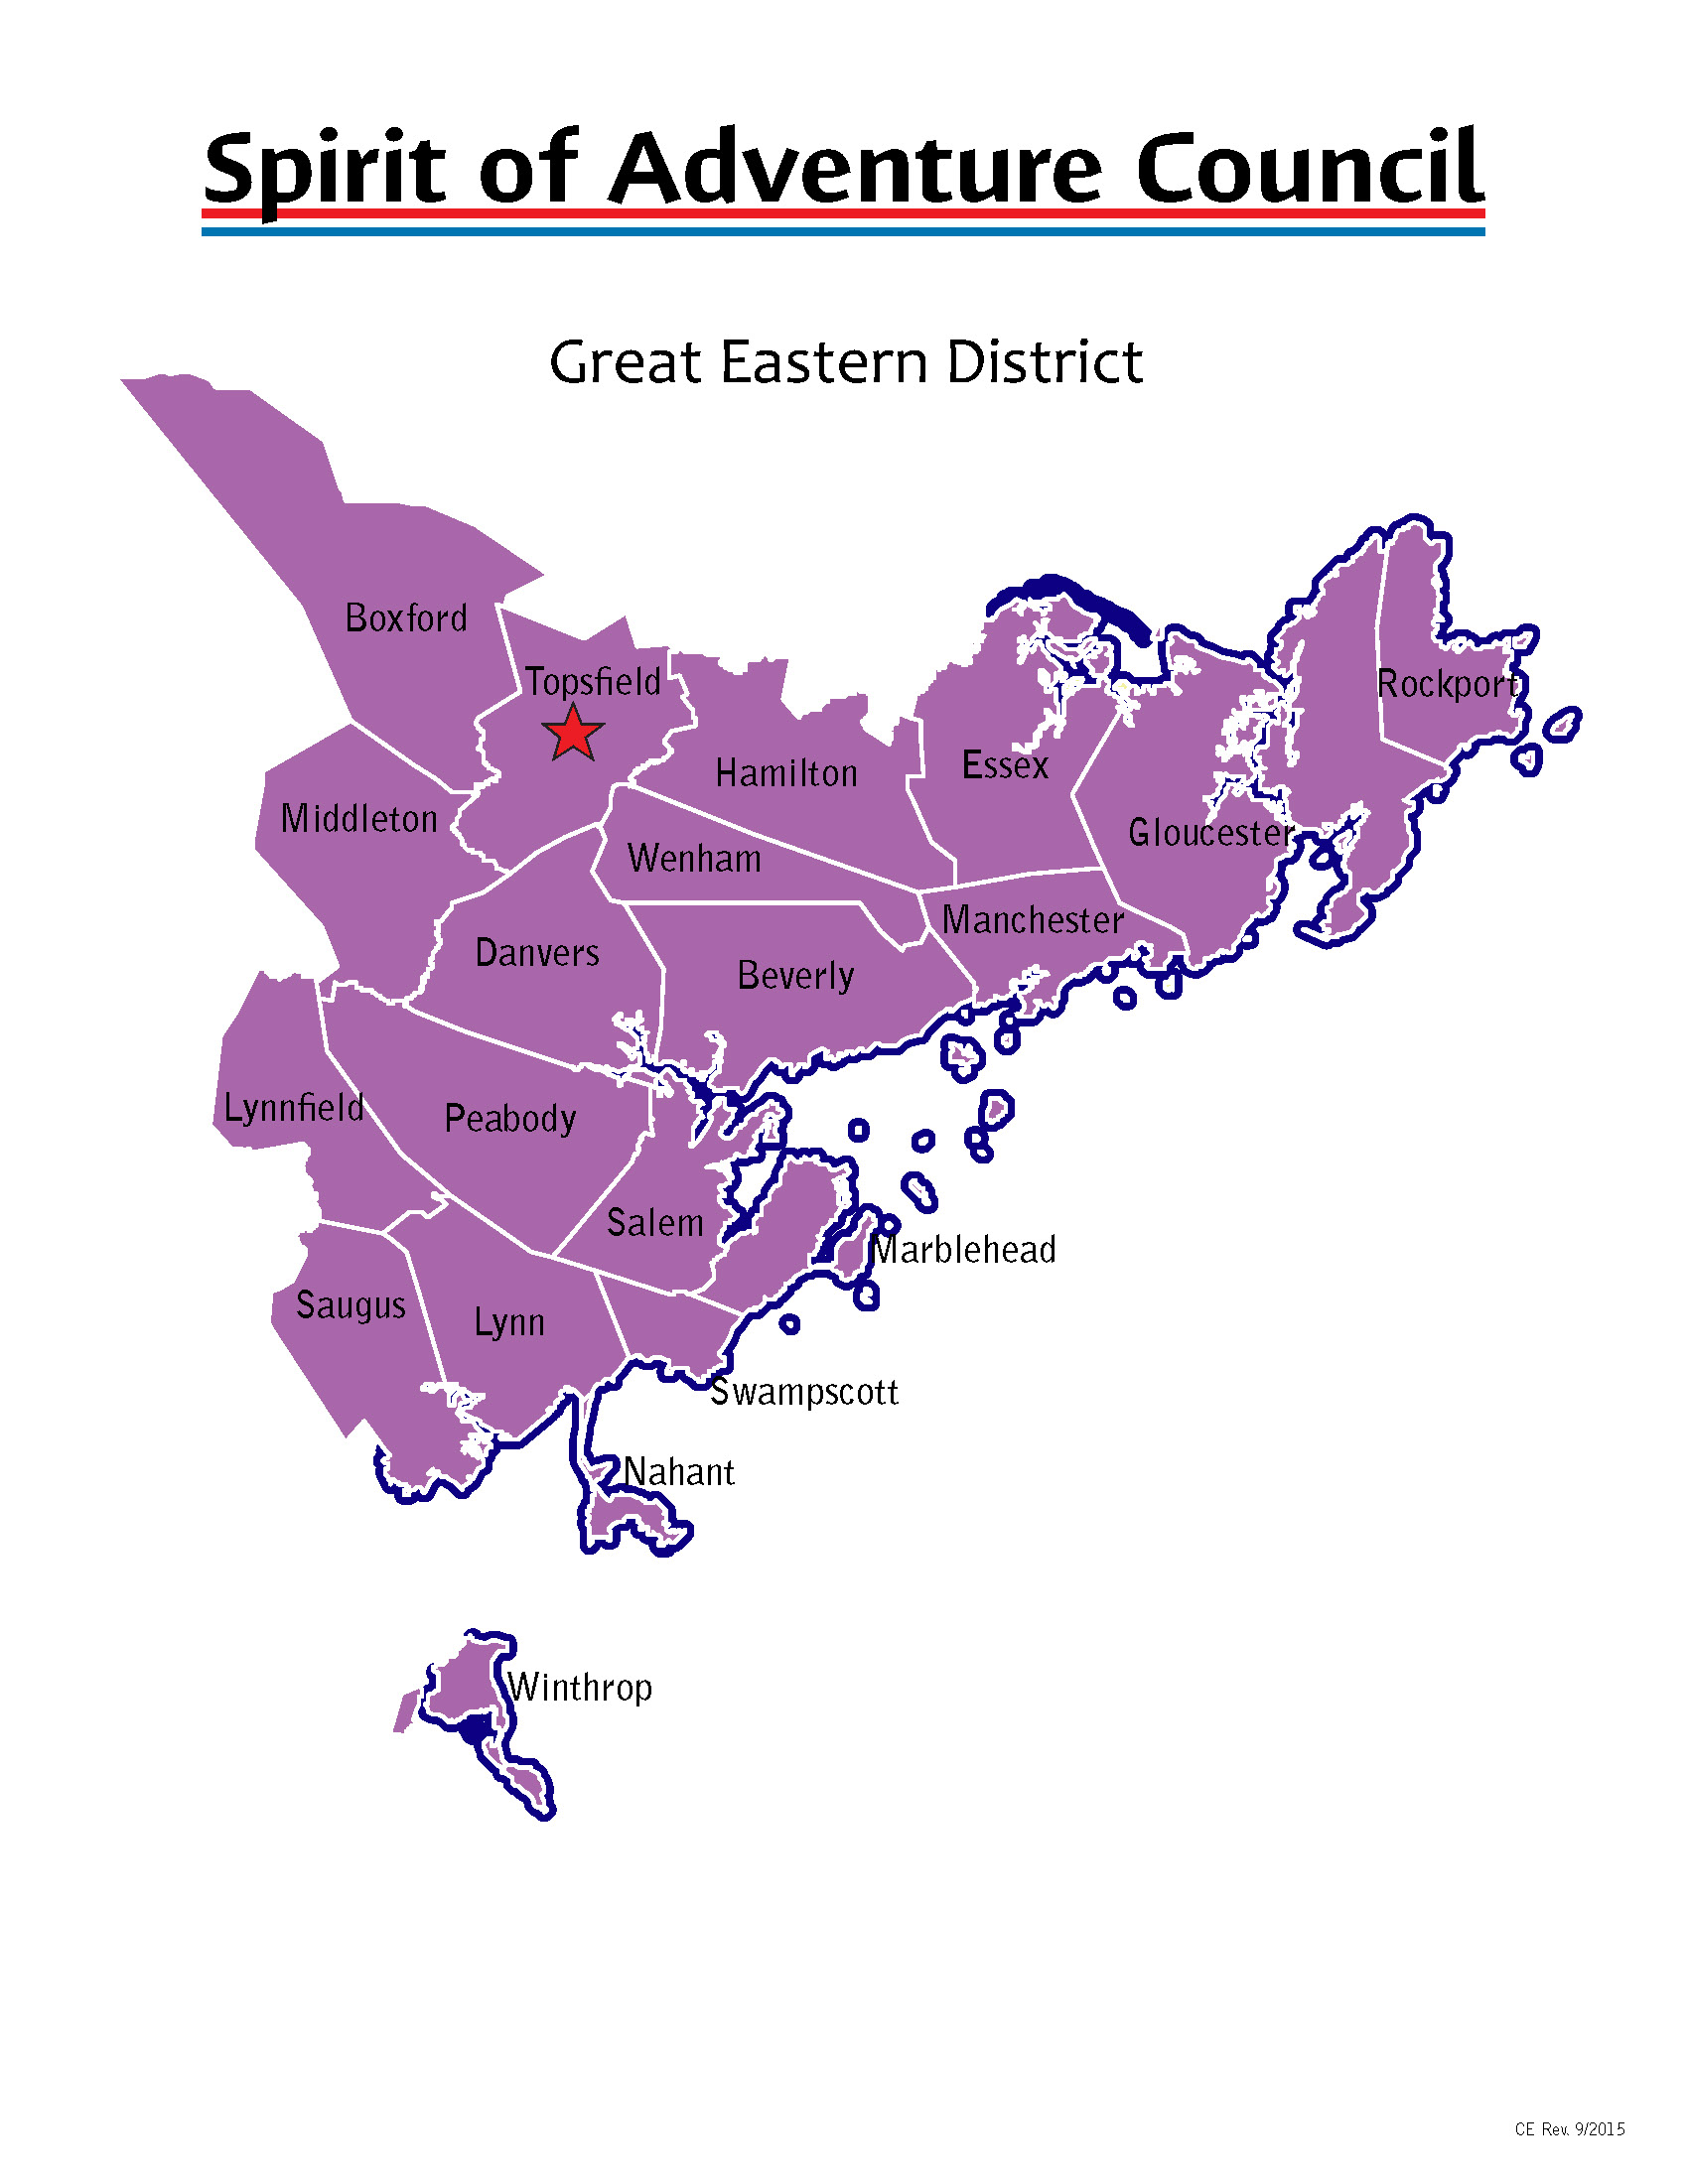 Great Eastern District